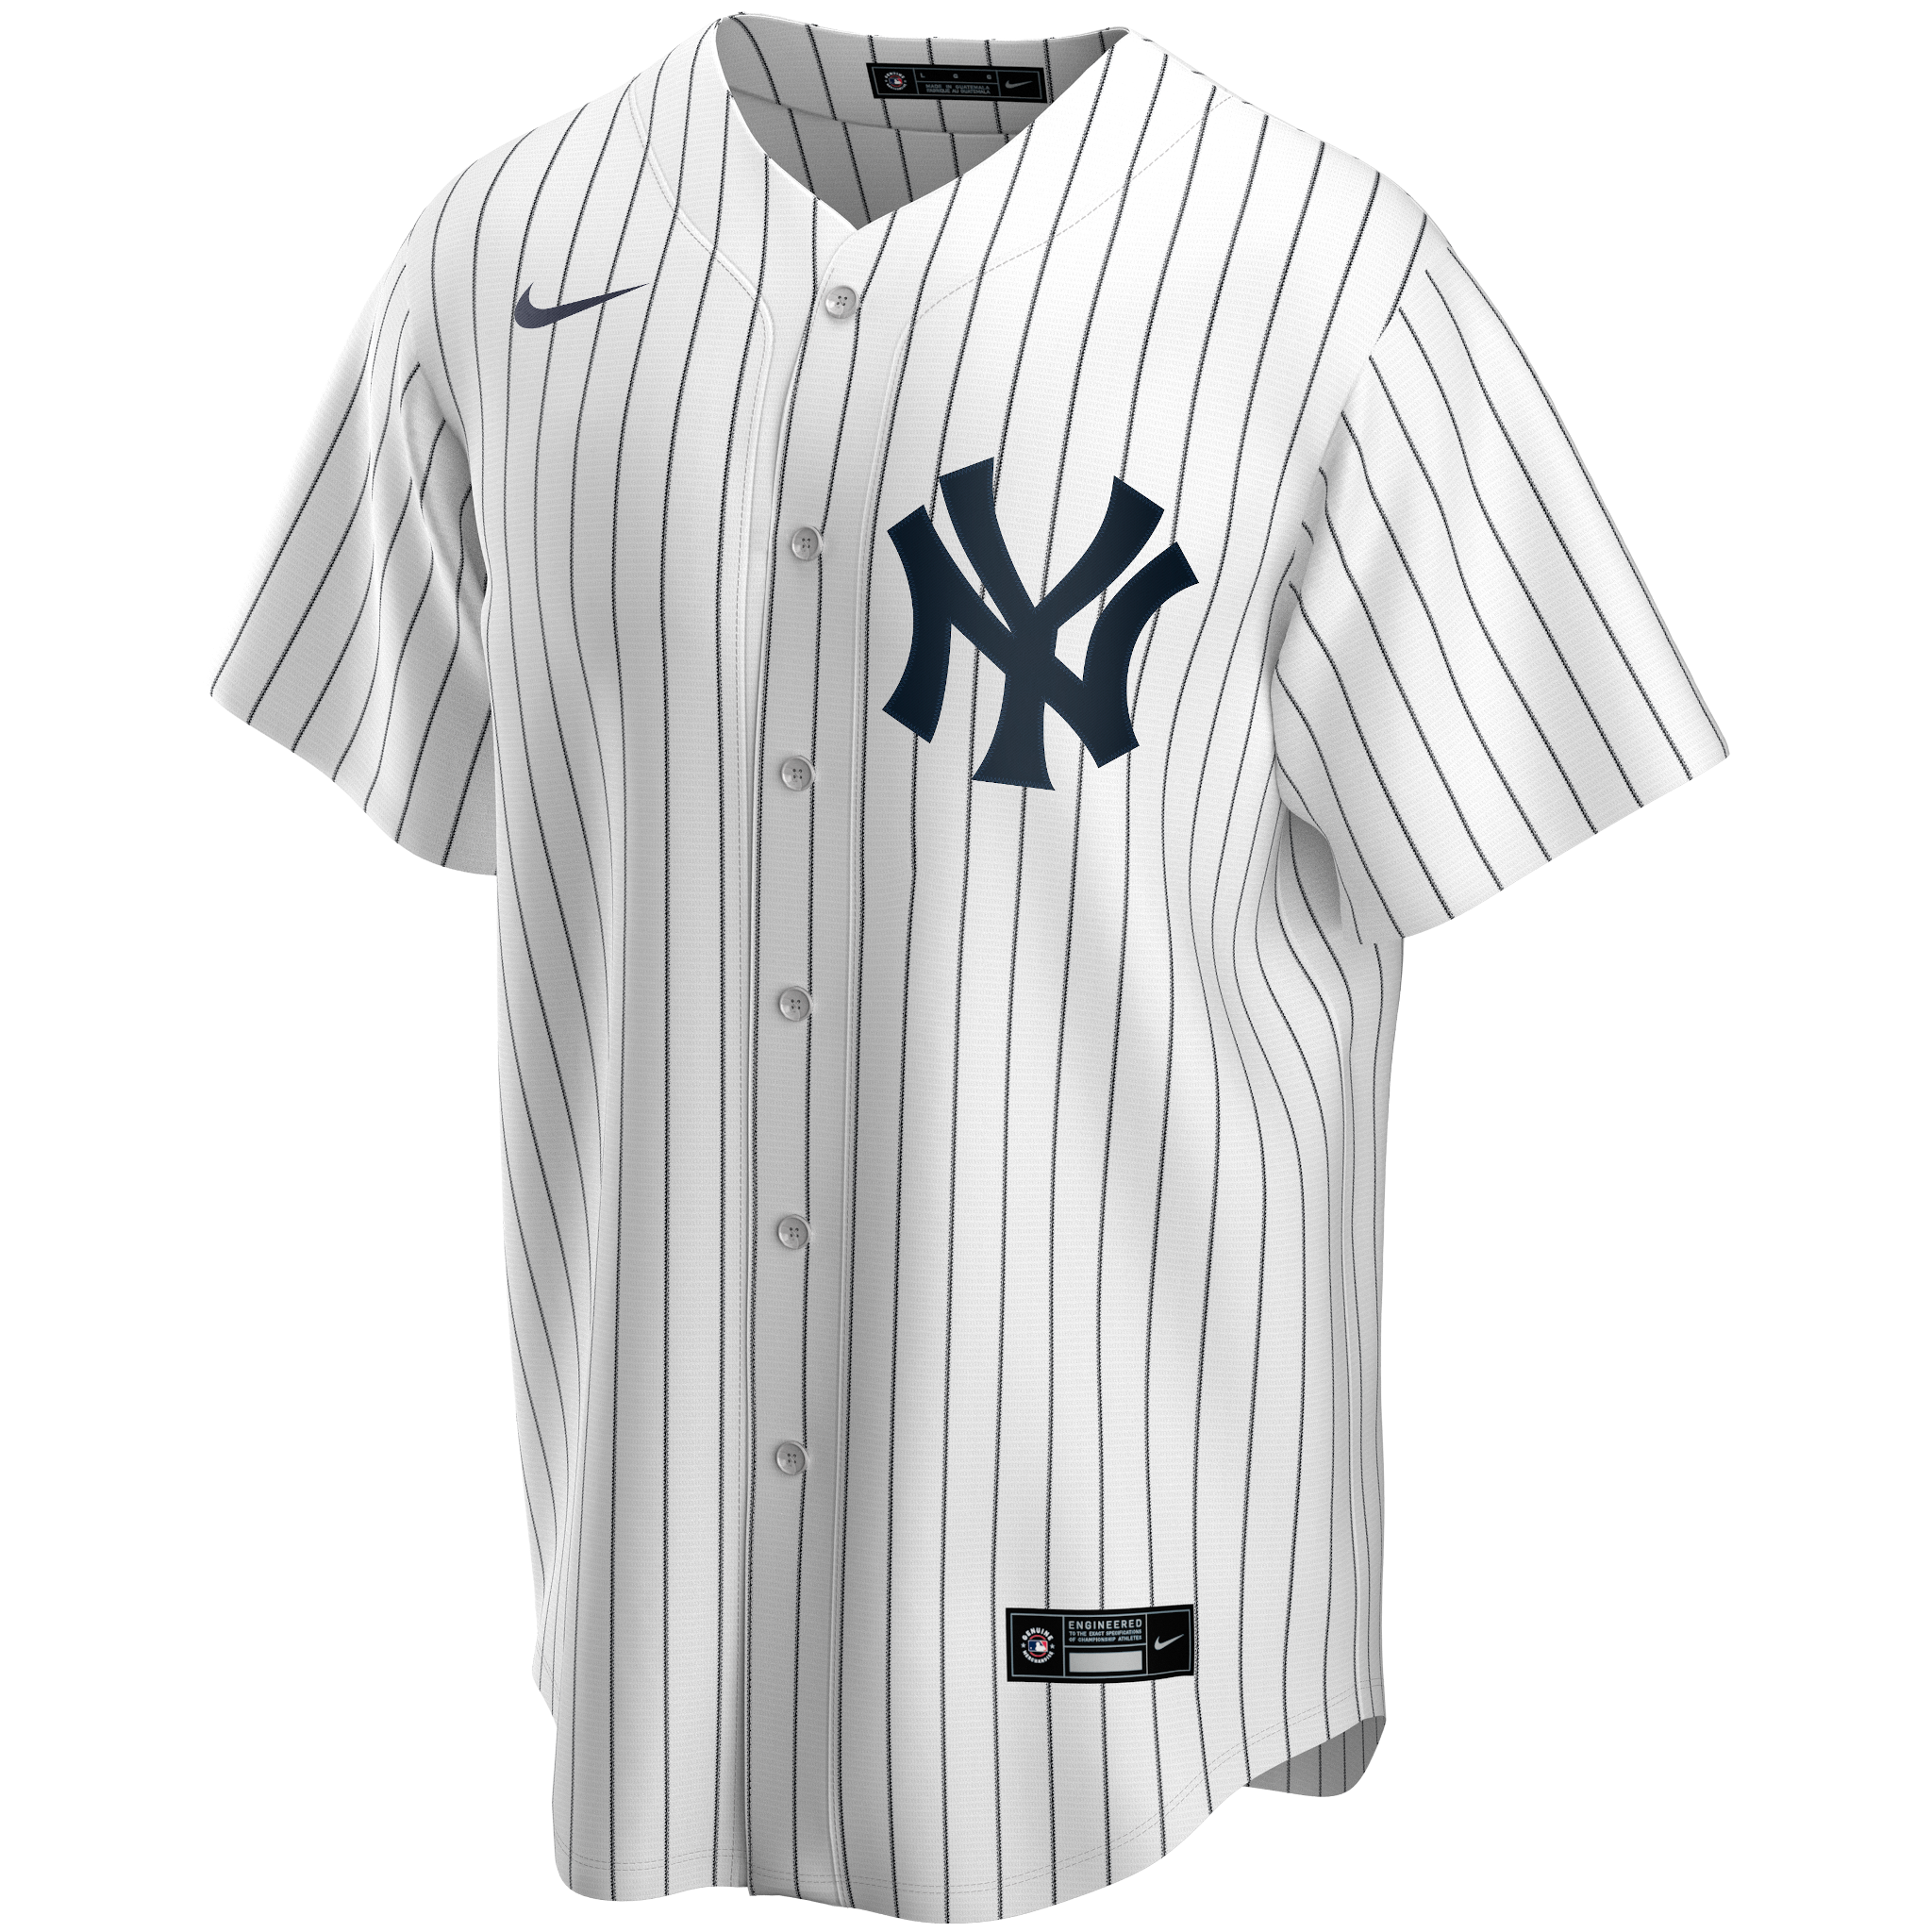 Gerrit Cole Youth No Name Jersey - NY Yankees Replica Kids Number Only Home  Jersey